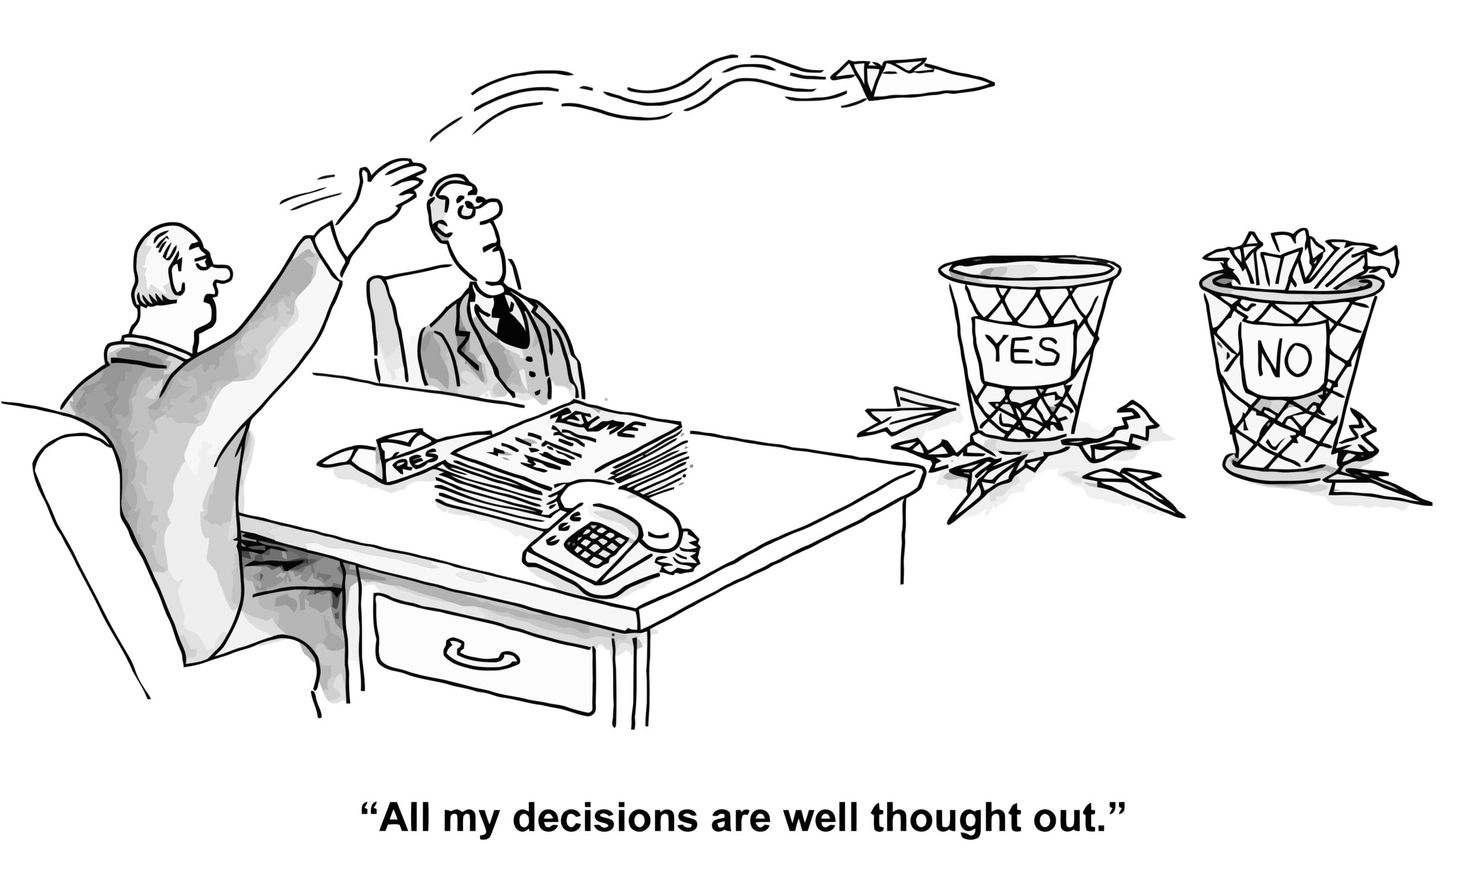 Cartoon about lazy thinking and decision making